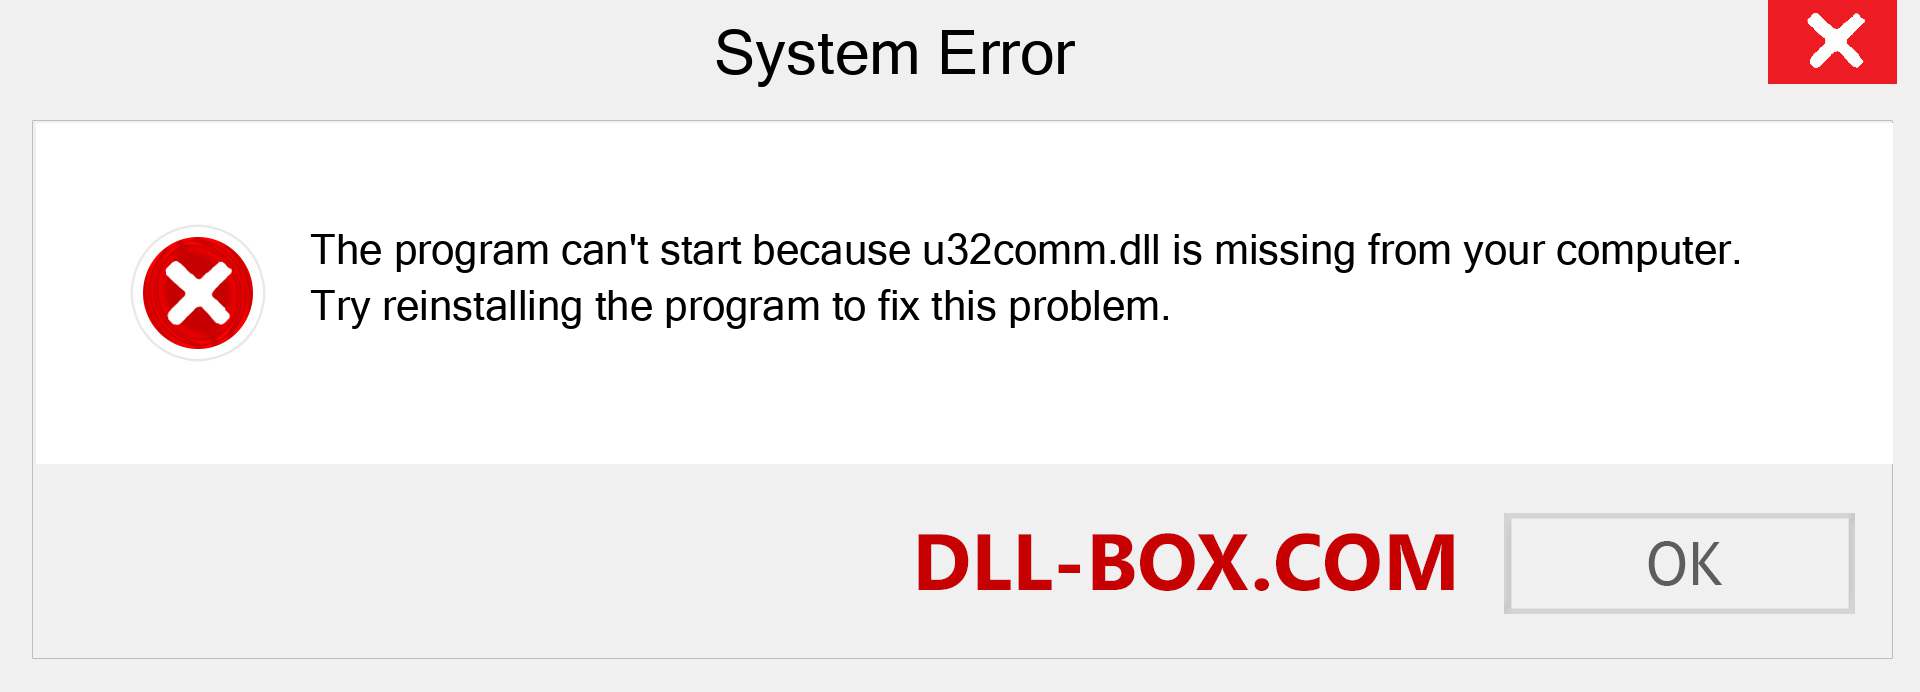  u32comm.dll file is missing?. Download for Windows 7, 8, 10 - Fix  u32comm dll Missing Error on Windows, photos, images